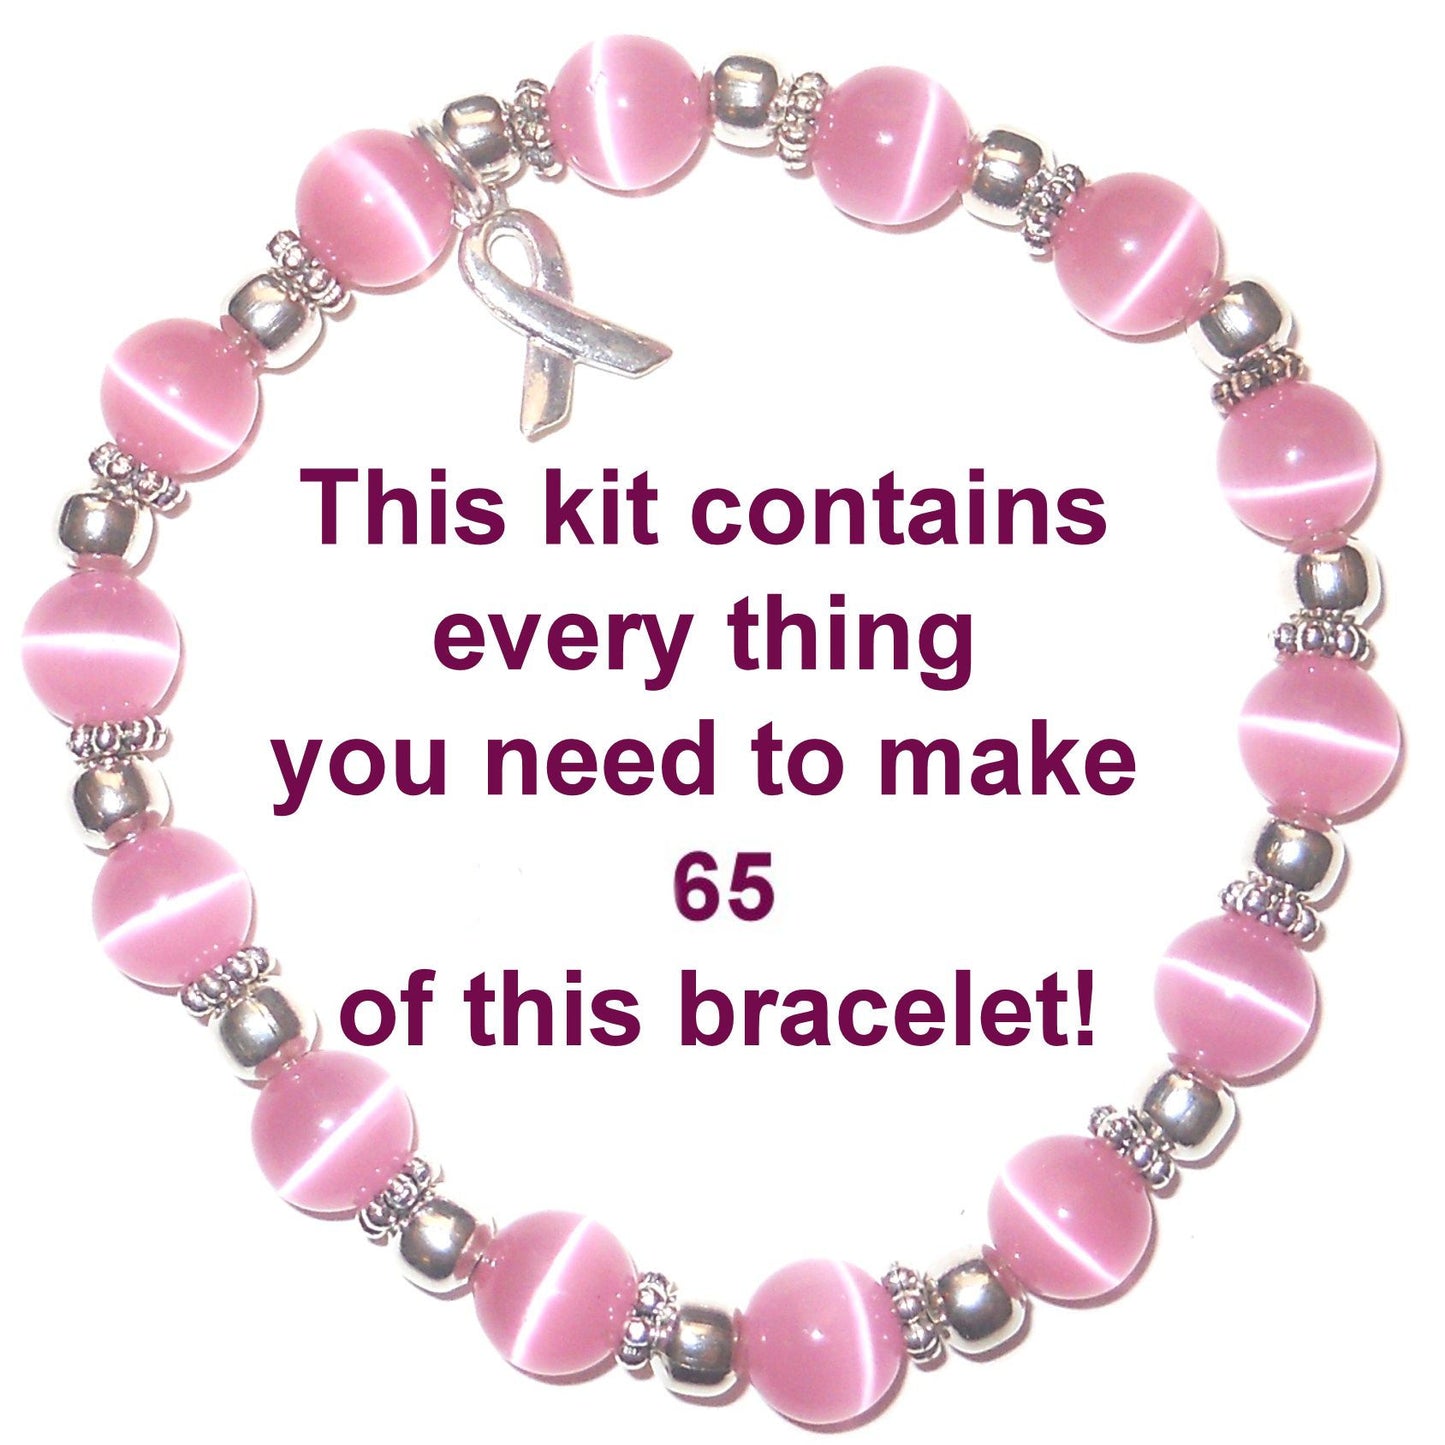 Breast Cancer Awareness Bracelet Kit With Stretch cord 8mm, makes 50